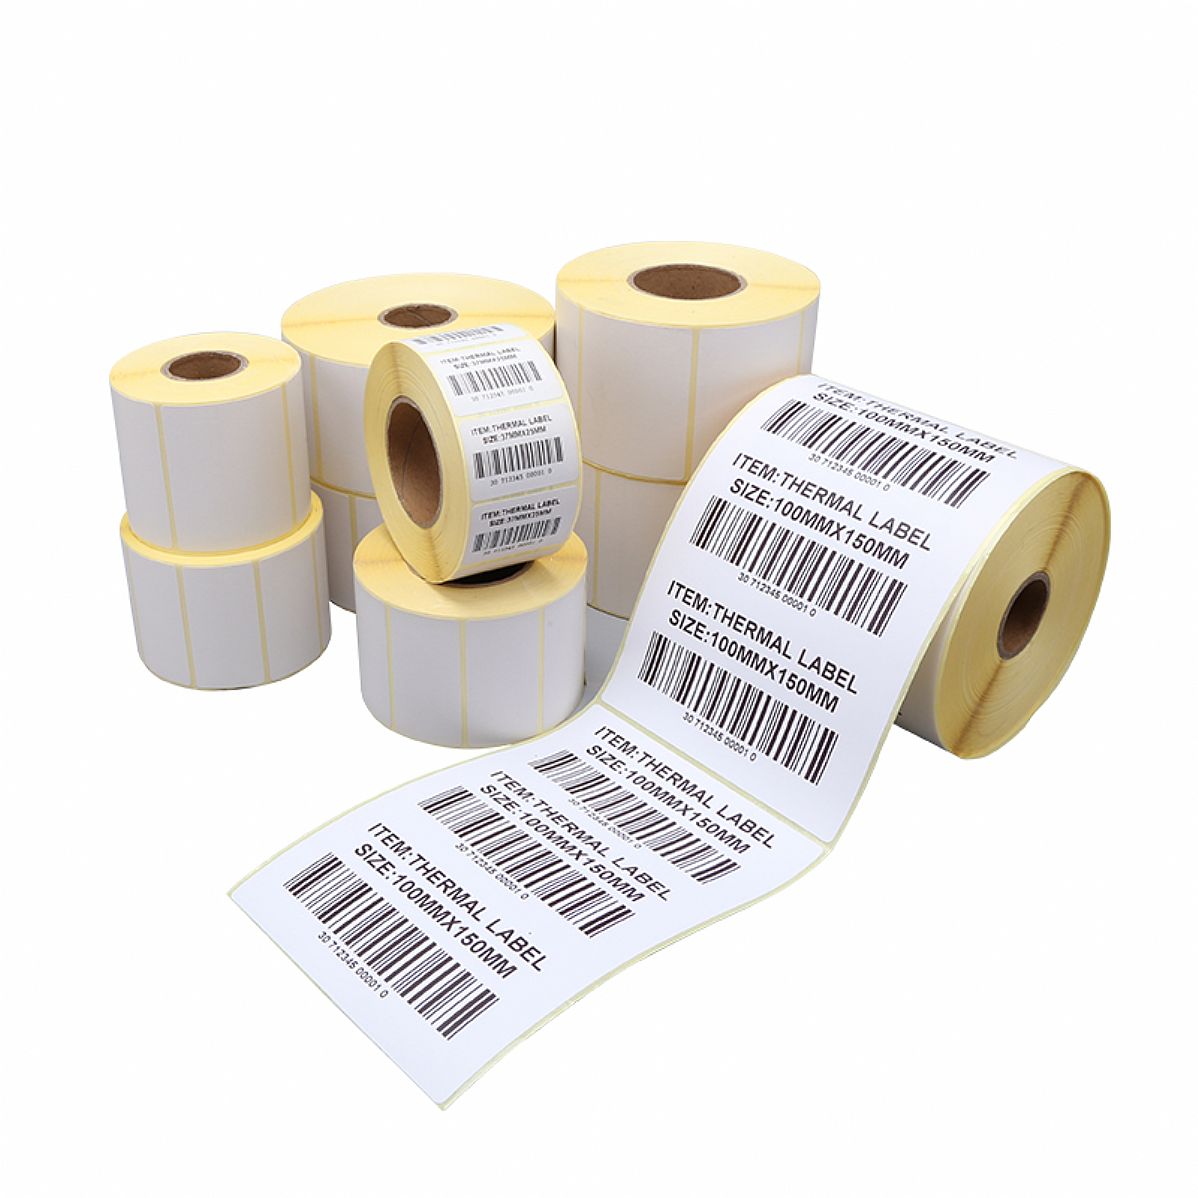 The Thermal Paper Guide: What Is It and Its Best Uses